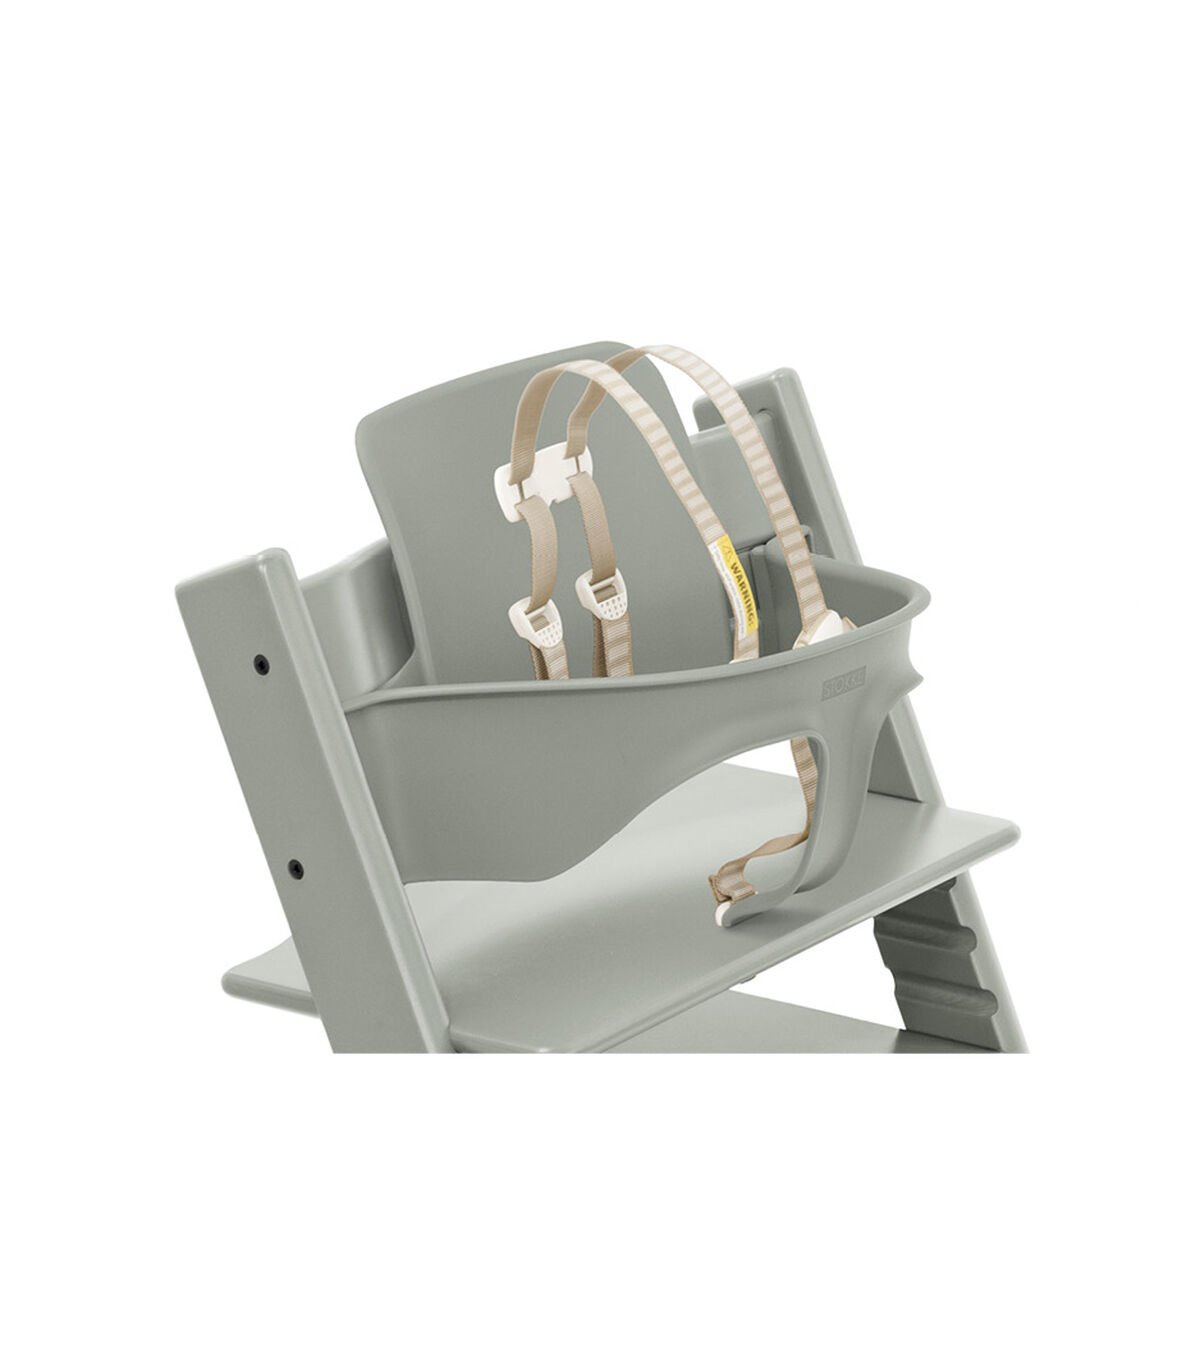 STOKKE Tripp Trapp High Chair - ANB Baby -$100 - $300